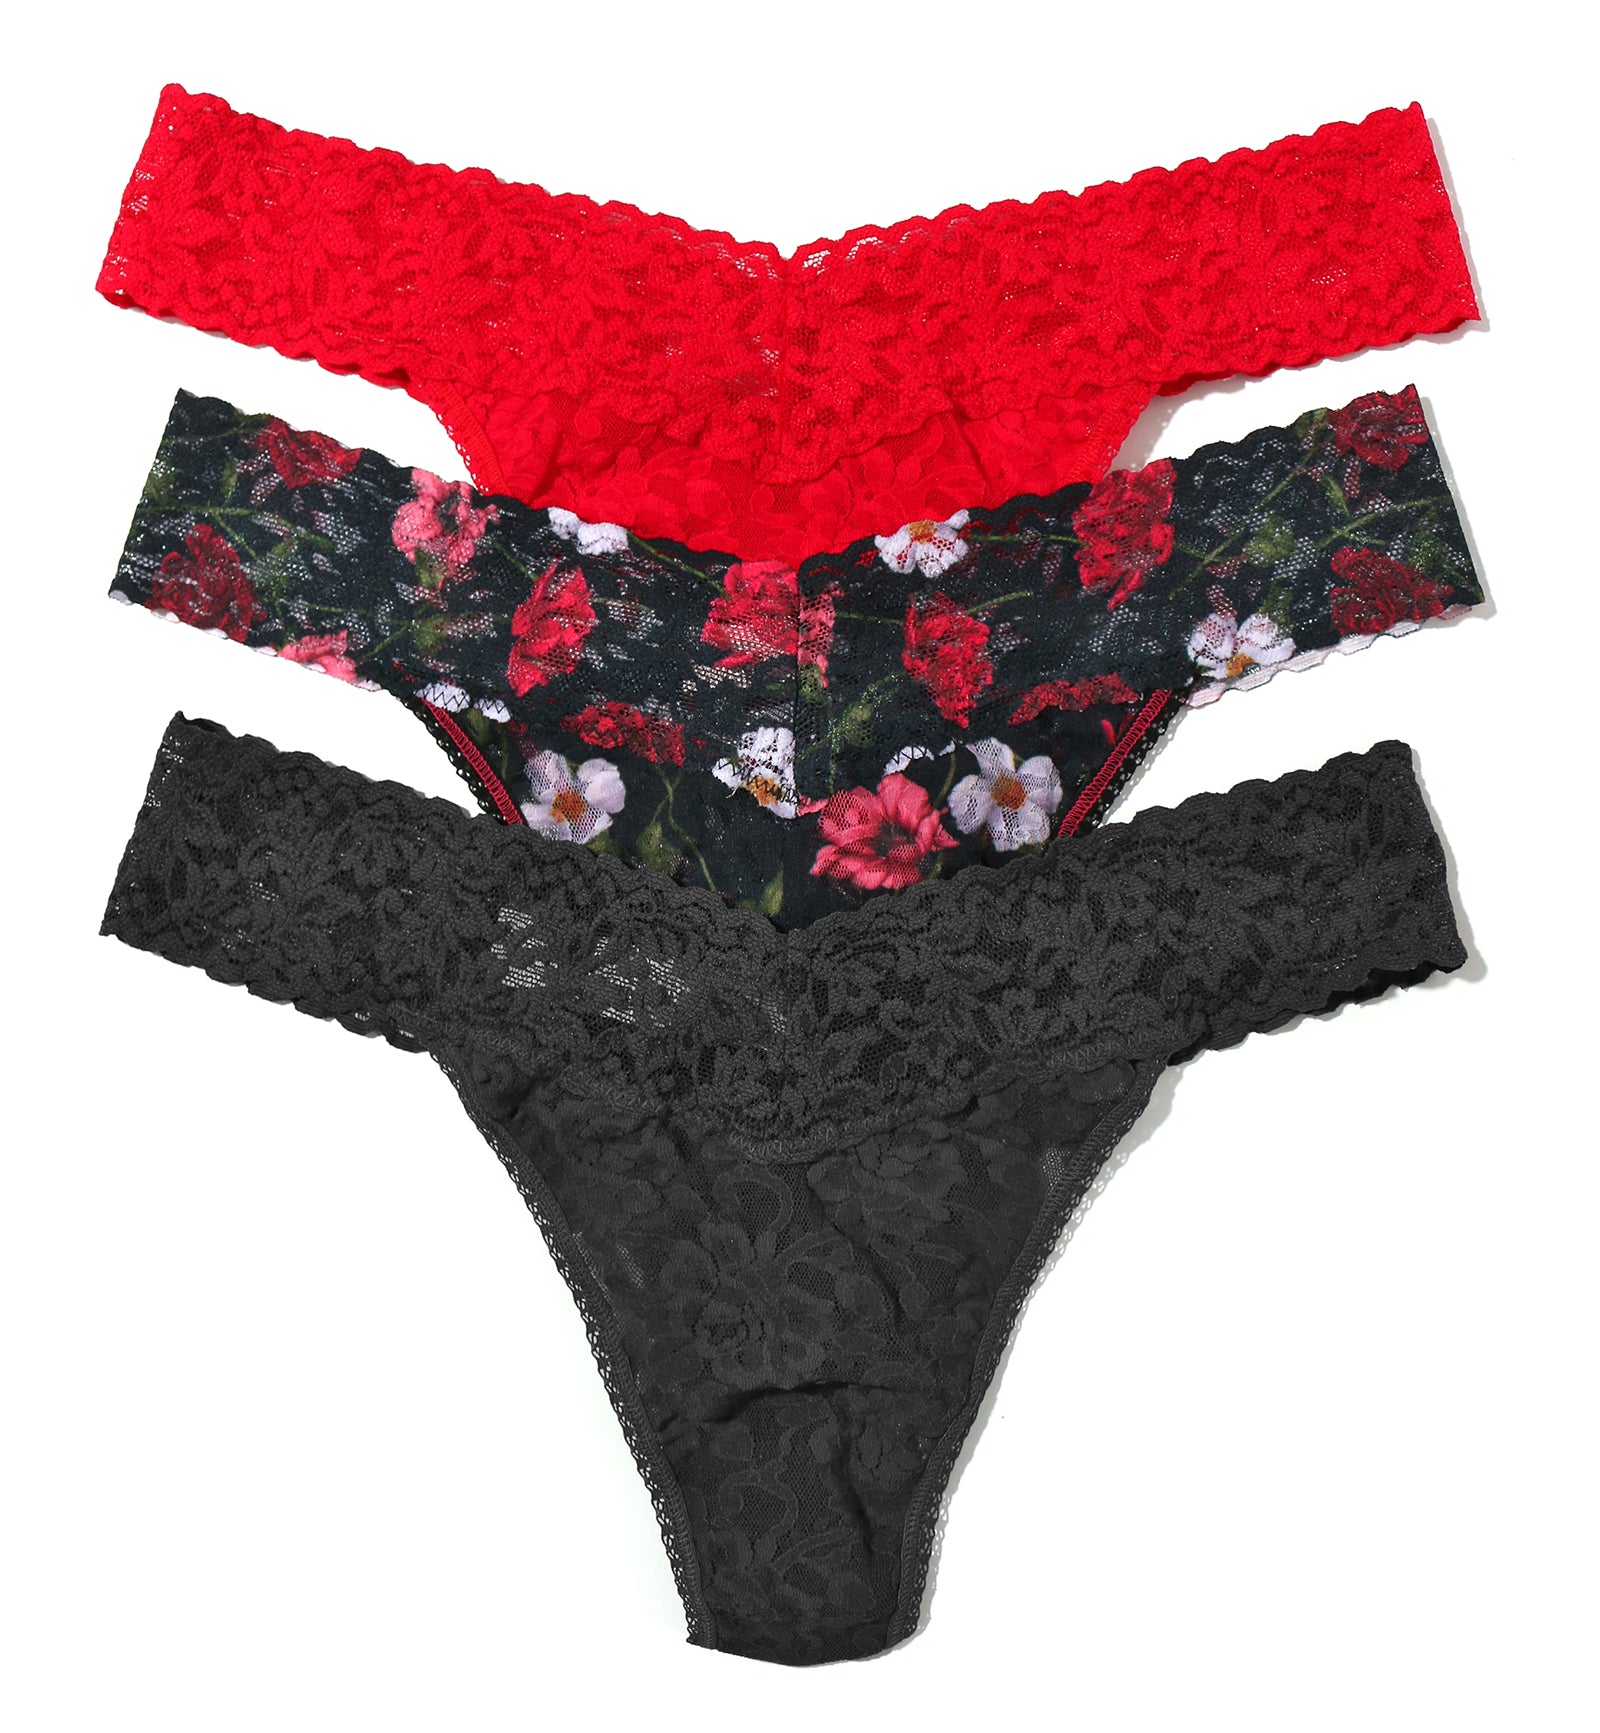 Hanky Panky 3-PACK Signature Lace Original Rise Thong (48113PK),Am I Dreaming - Red/Am I Dreaming/Black,One Size